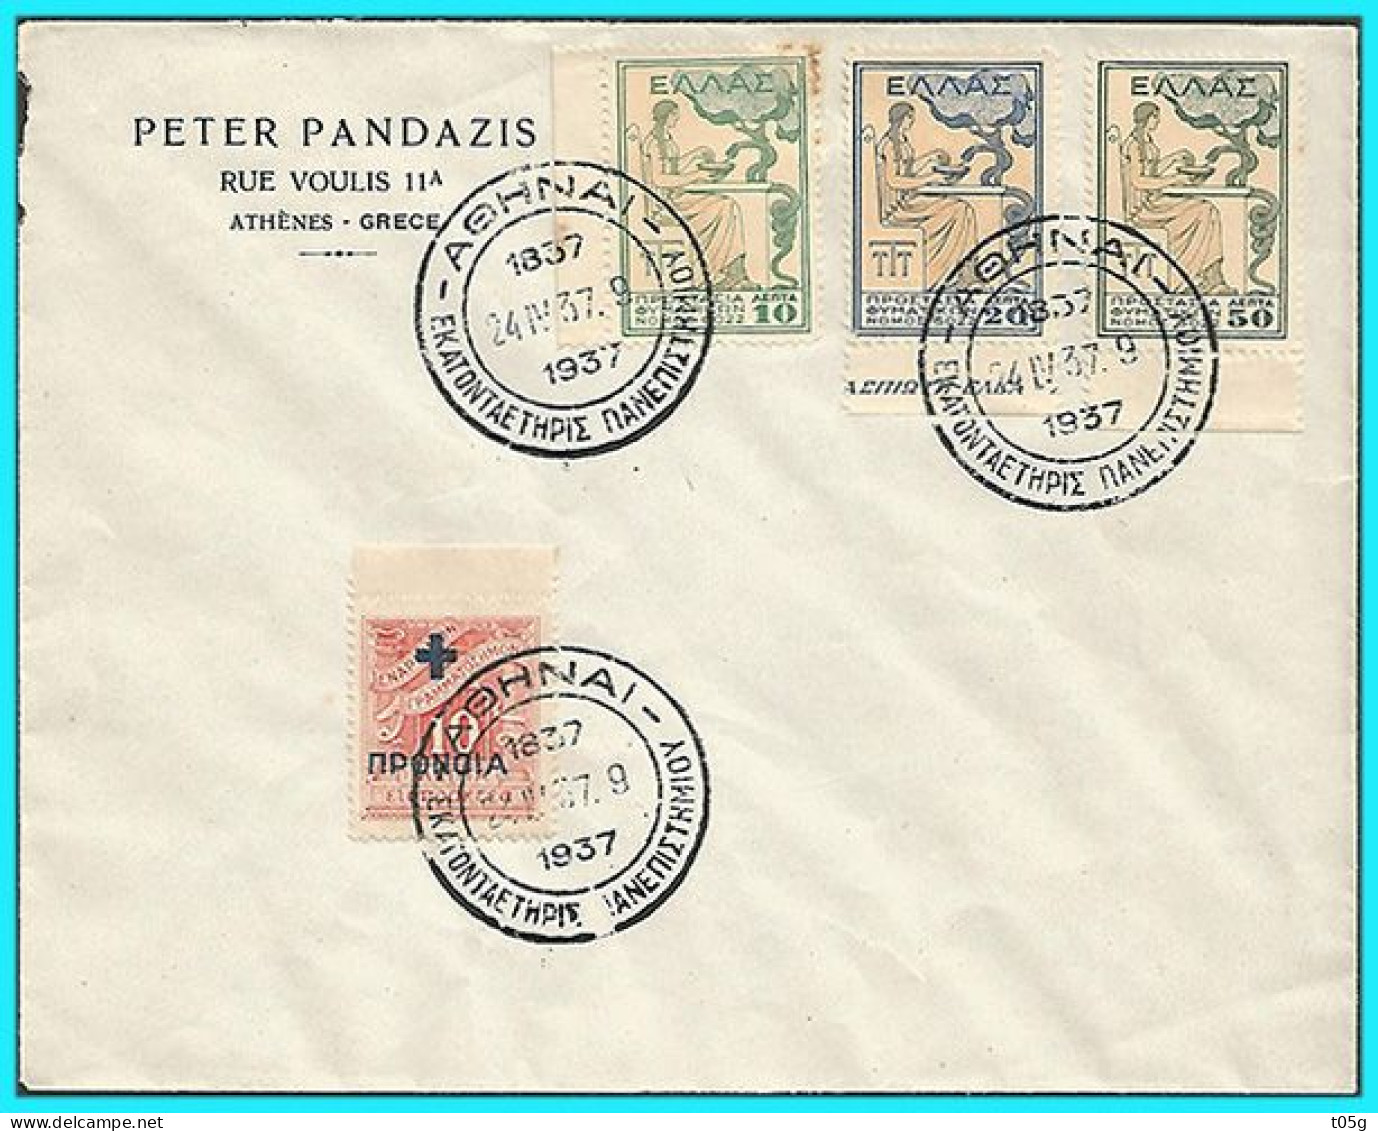 GREECE- GRECE - HELLAS CHARITY STAMPS 1935:  Philatelic Envelope "Protection For Tuberculosis Patients" With " ELLAS - Charity Issues